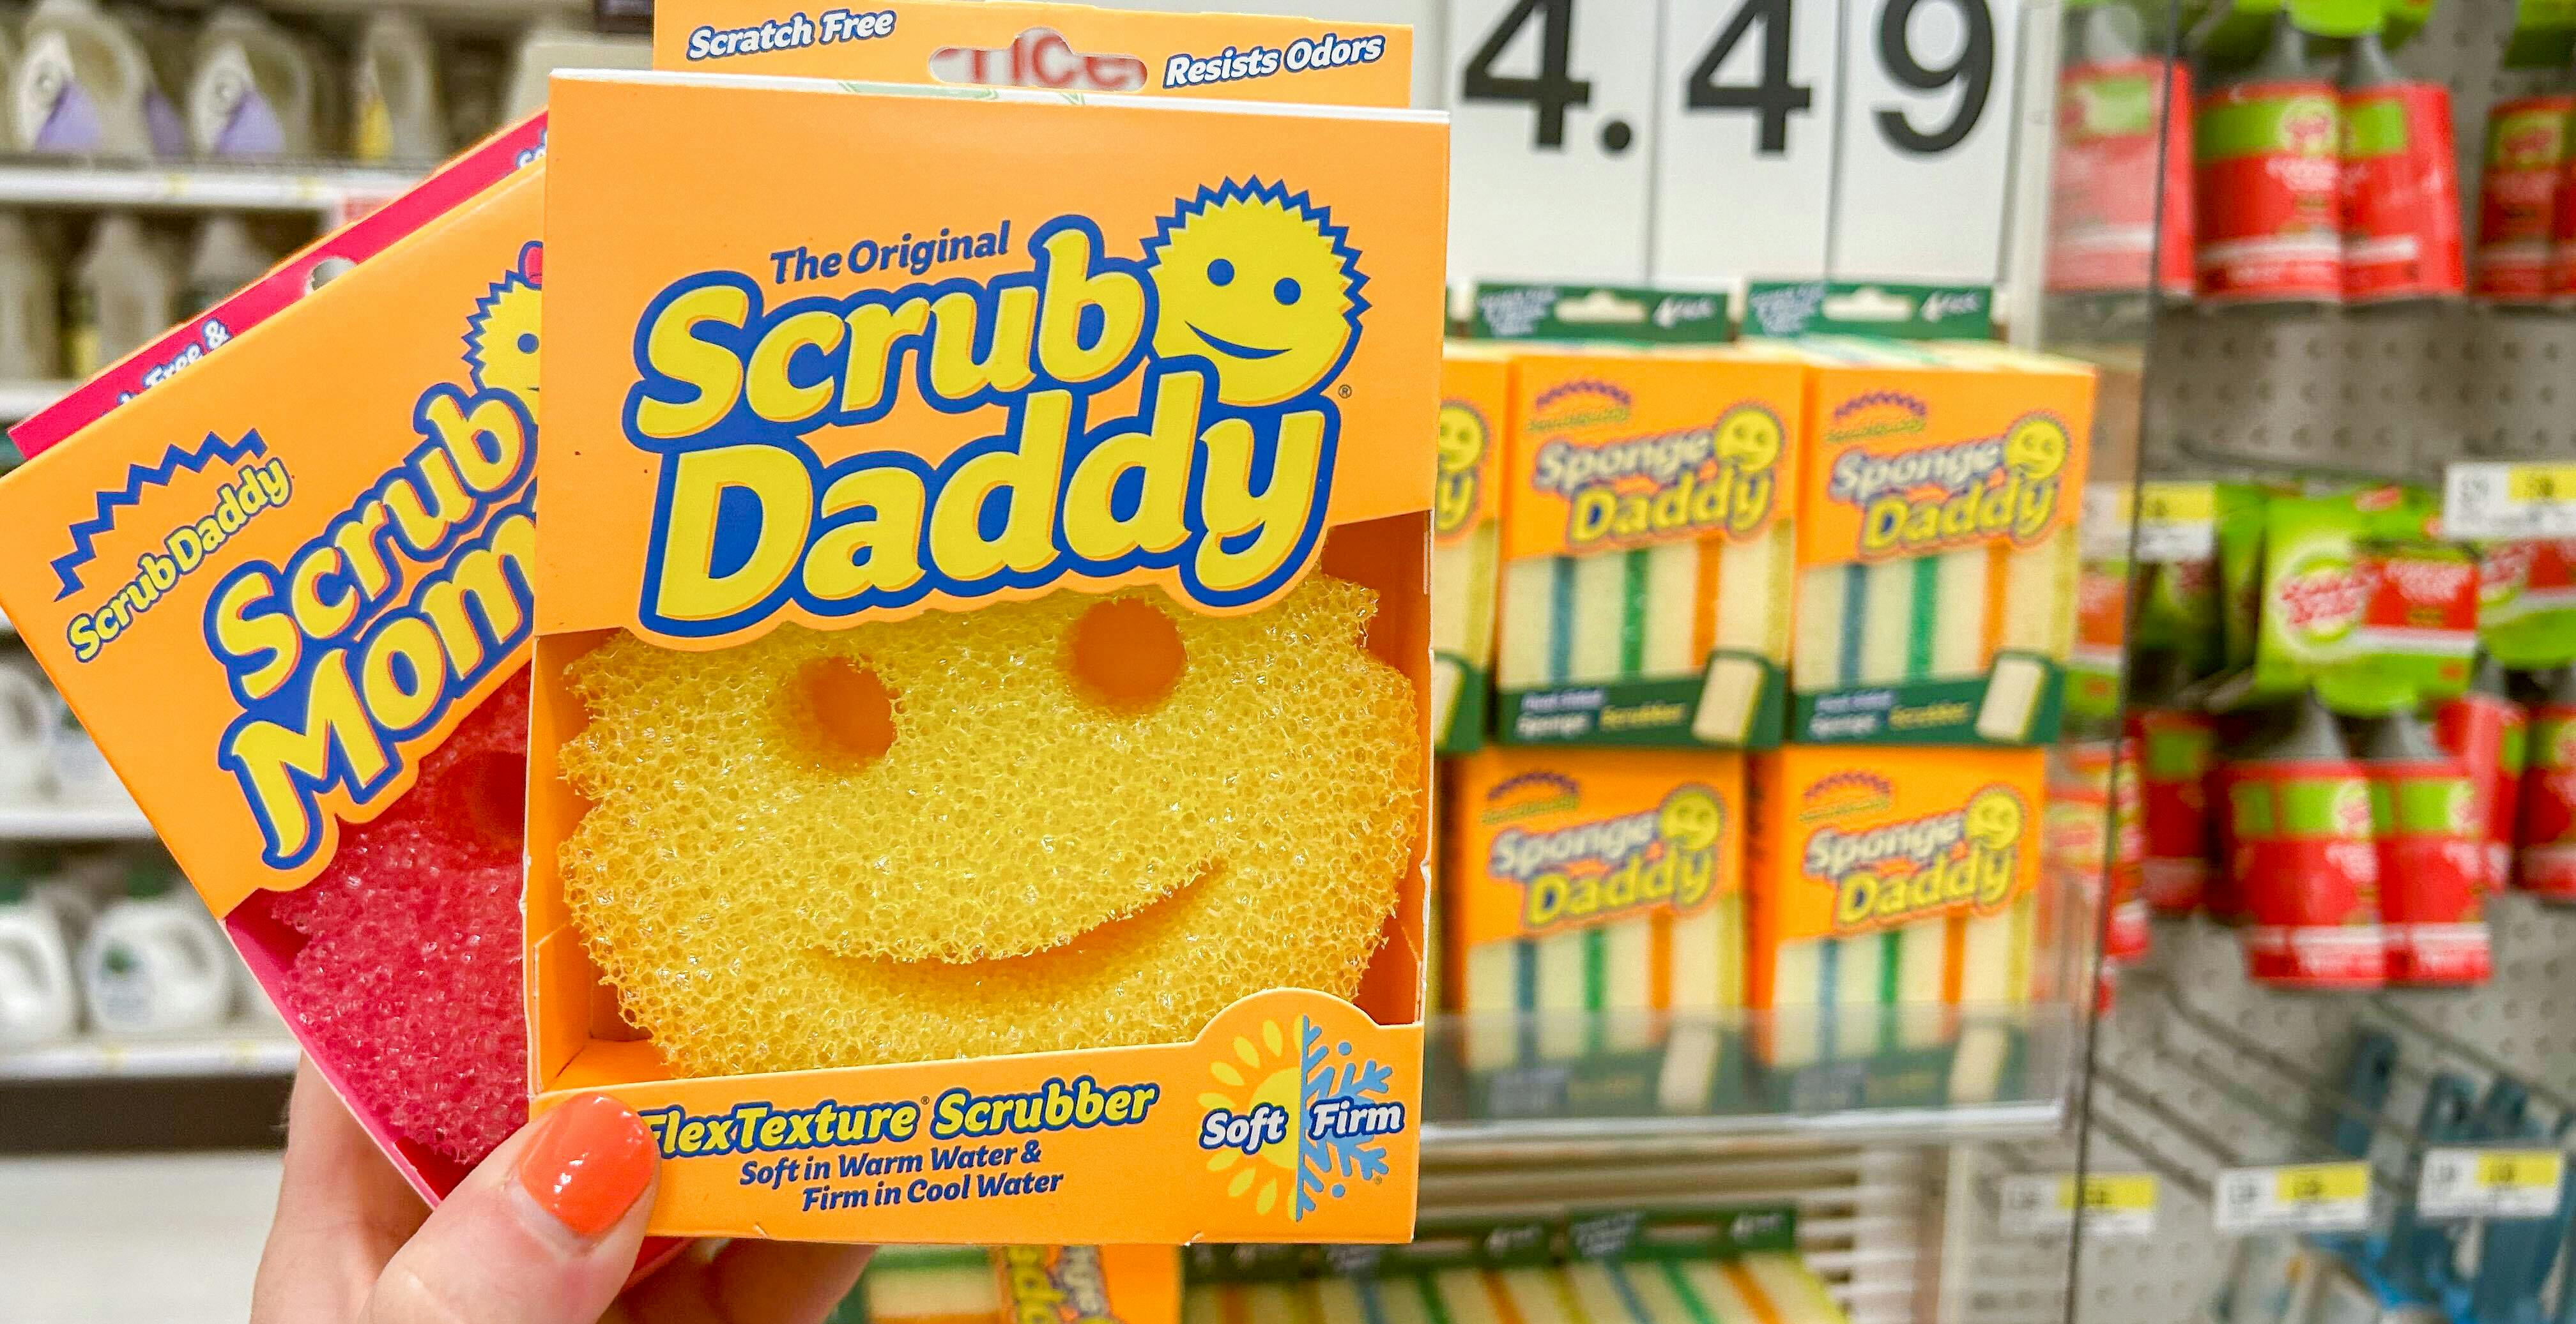 https://content-images.thekrazycouponlady.com/nie44ndm9bqr/6k8NkIDSbYuzig1yRRn7XH/9596cb48d8e7ecb4c7913900f6e7c152/grab-scrub-daddy-products-at-target-scrub-daddy-and-mommy-kcl-feature-1684502874-1684502874.jpg